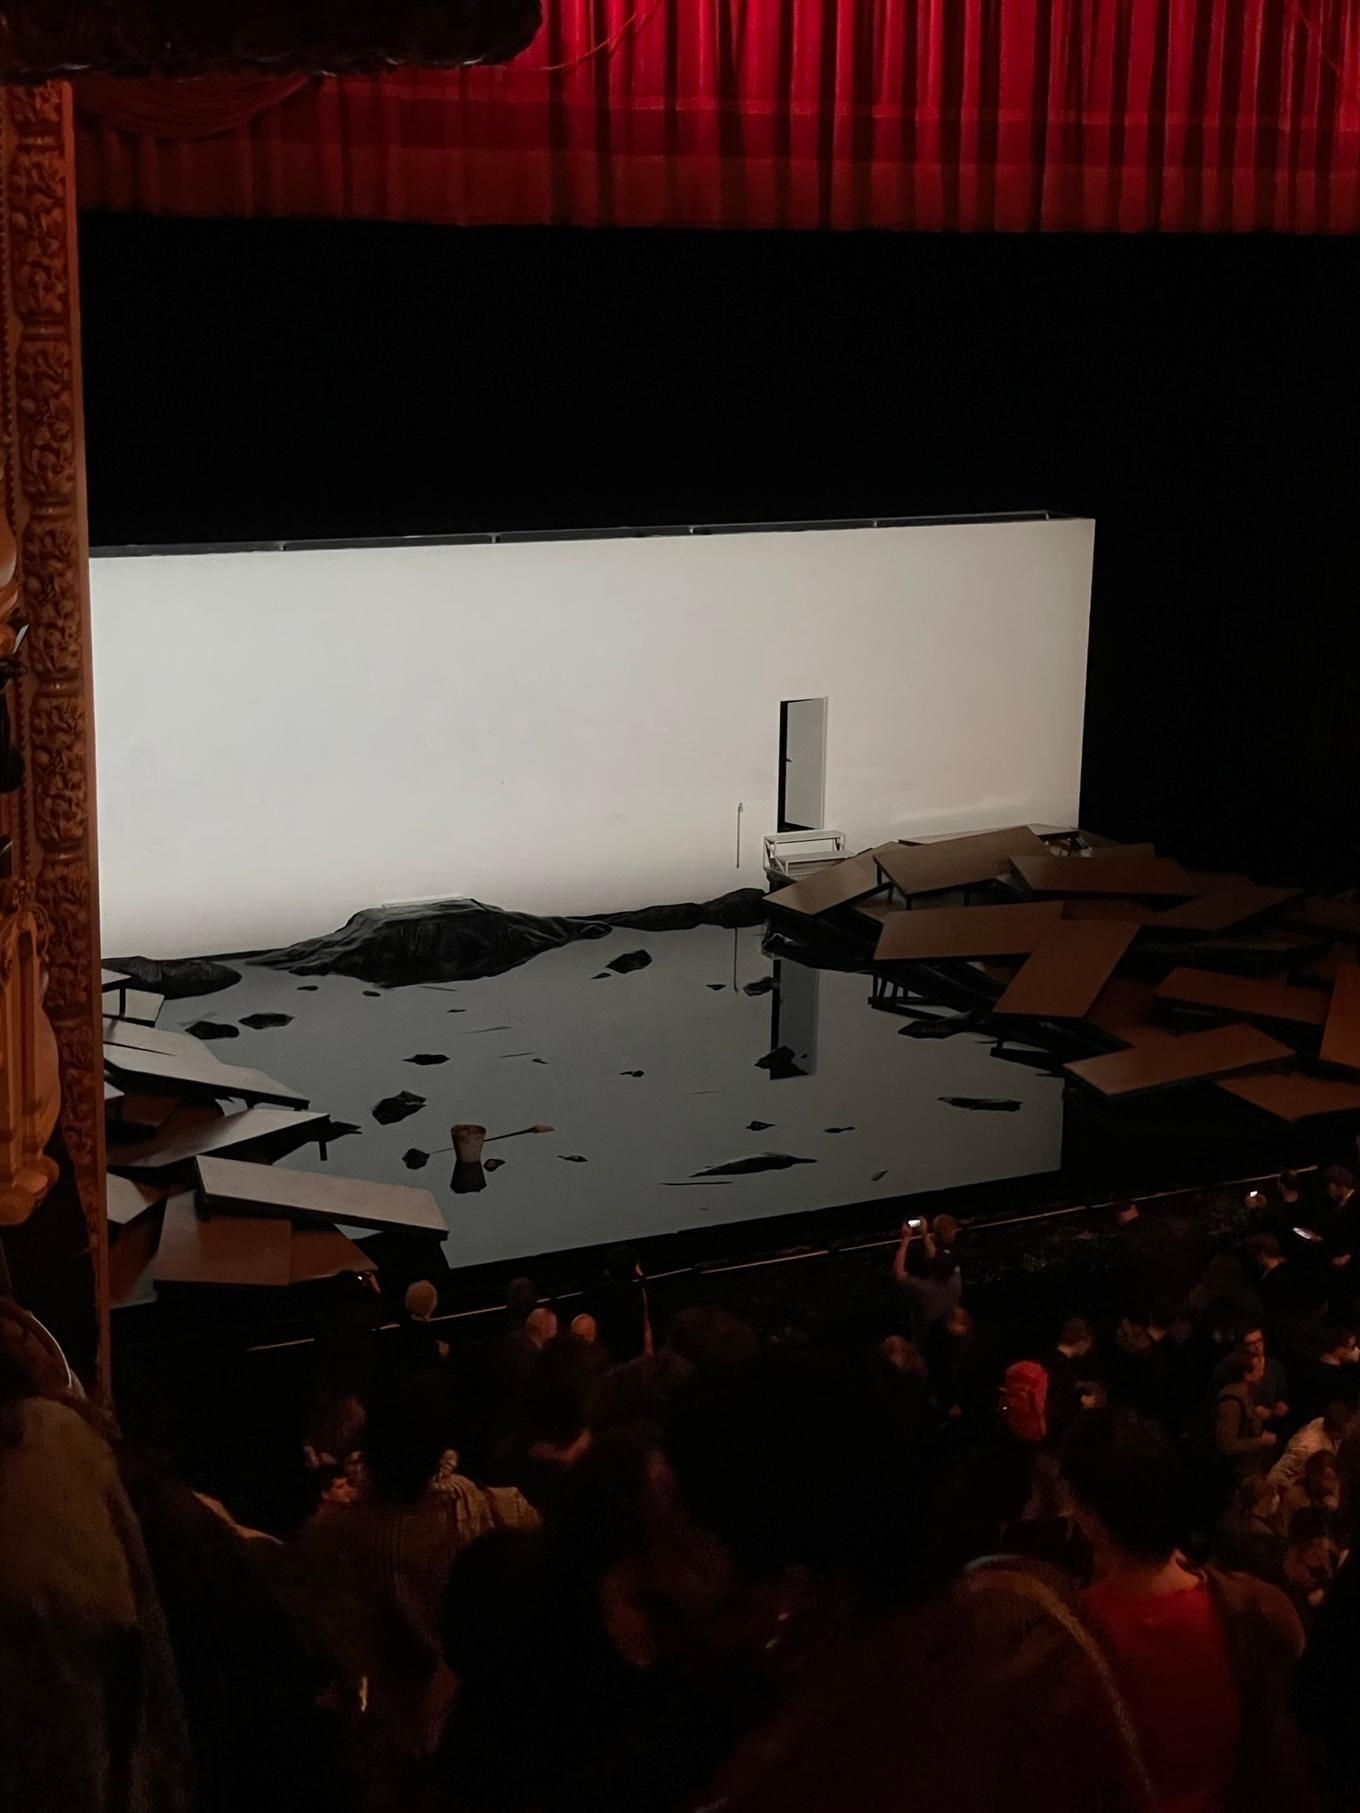 Image of the stage post-show, broken apart to reveal the water underneath